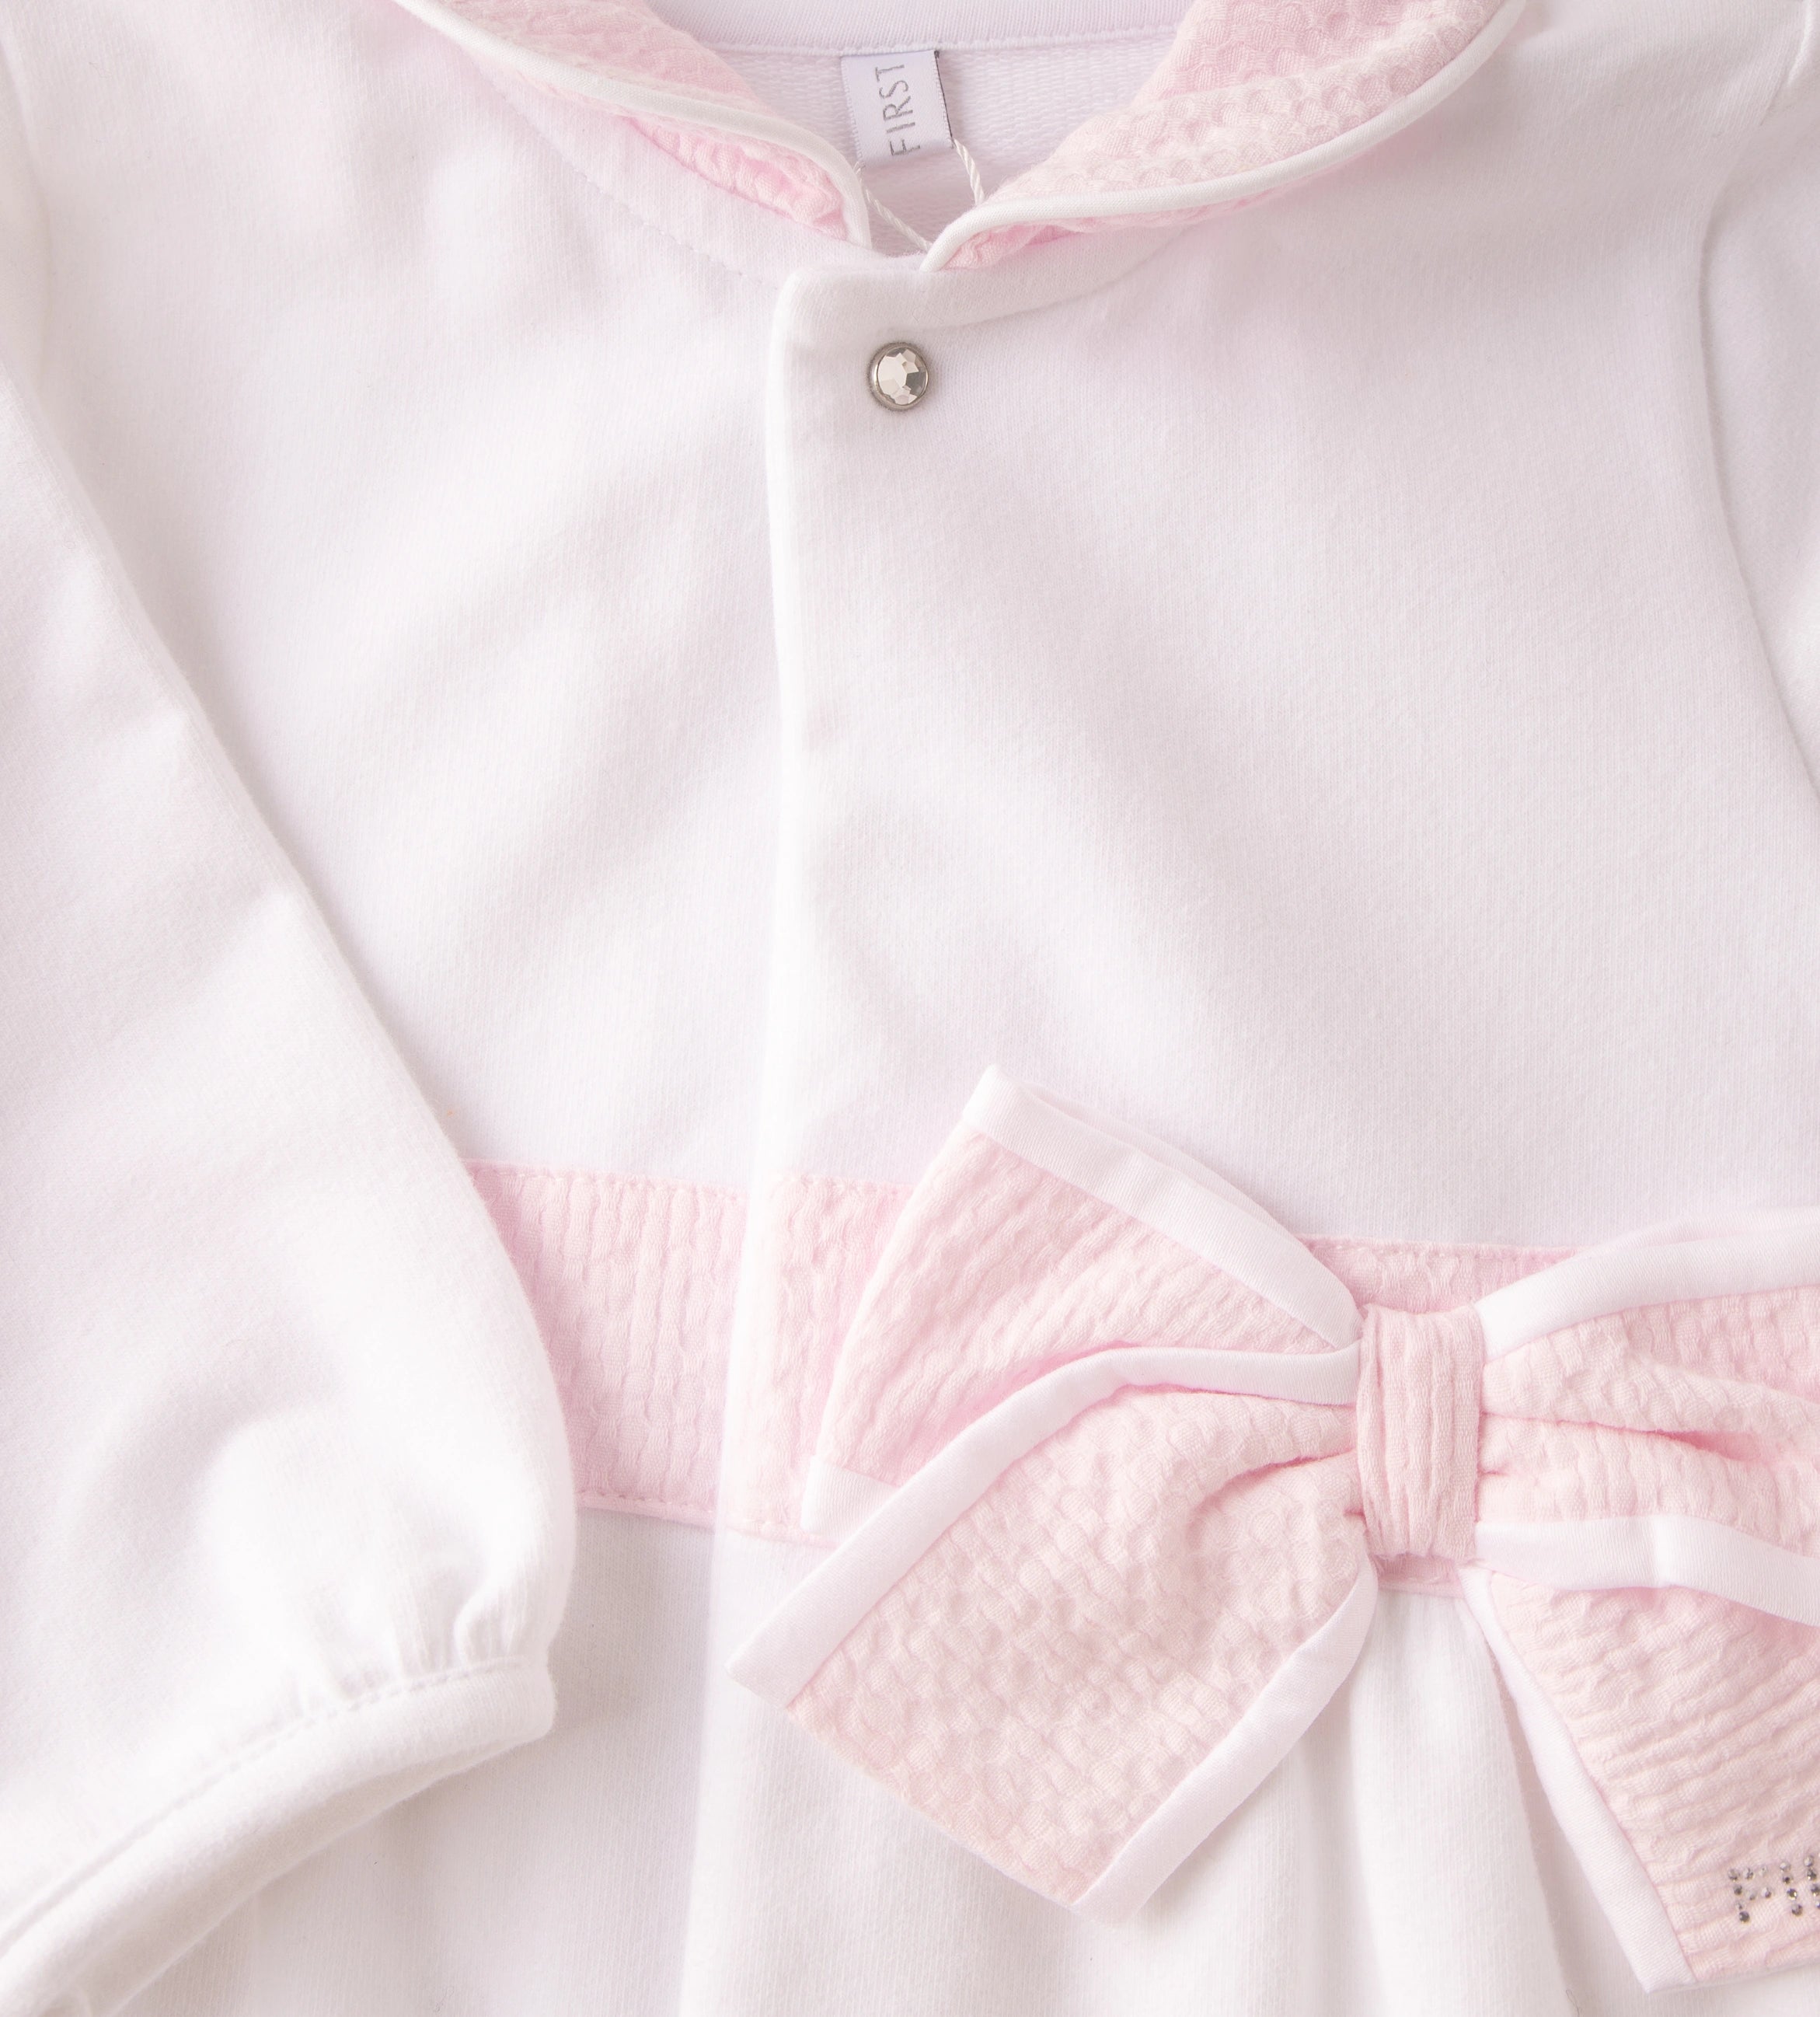 Bodysuit with Bow White/Pink